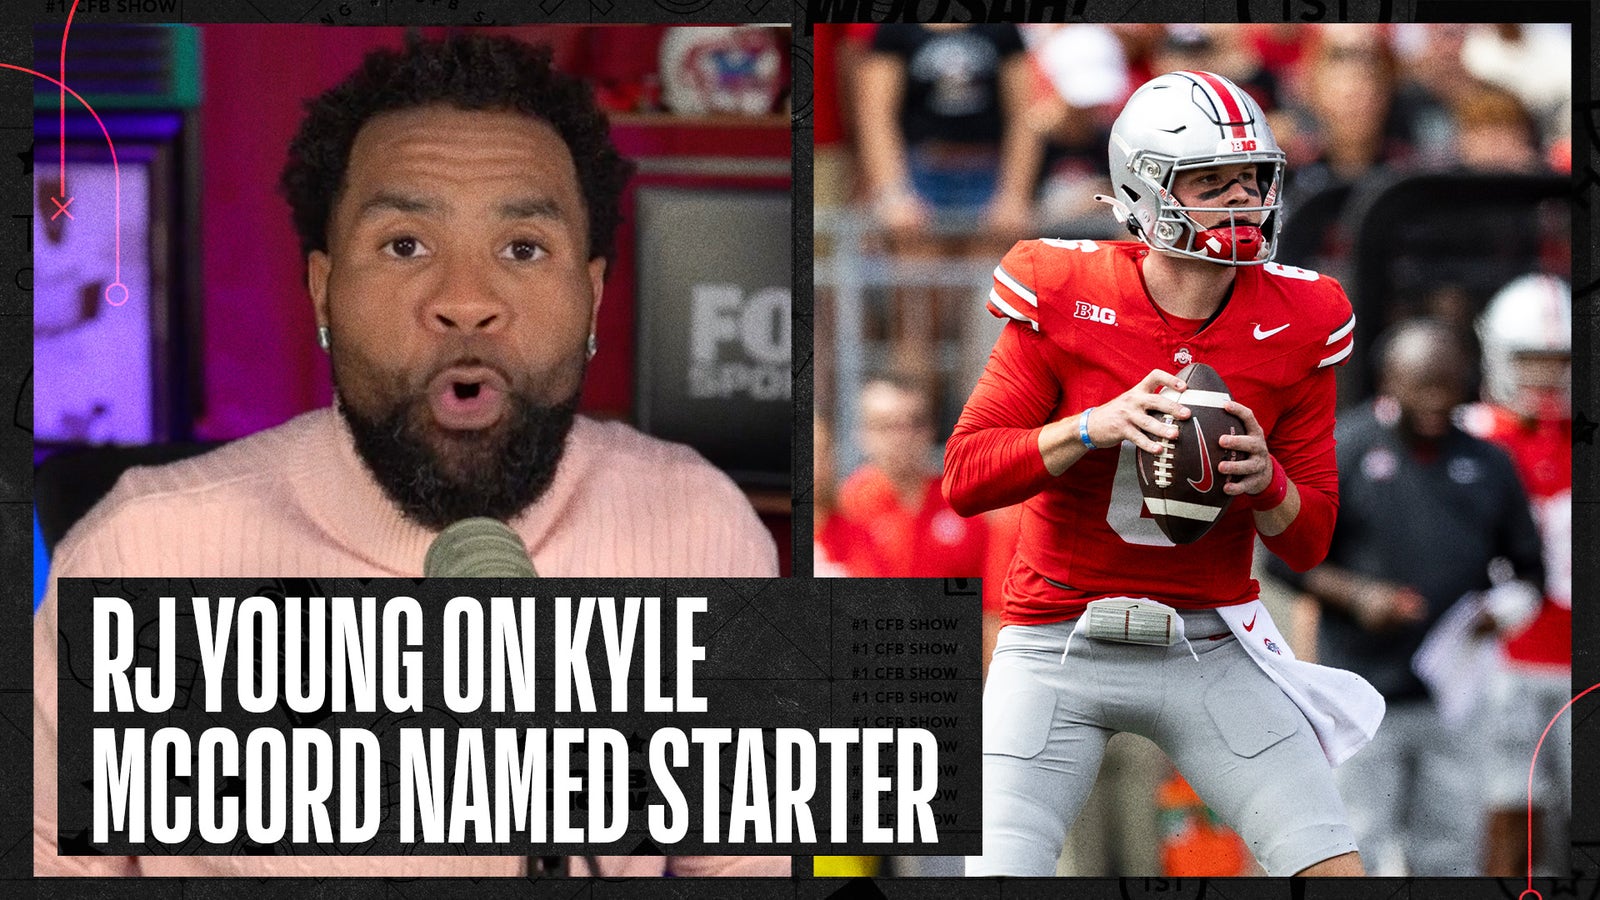 Kyle McCord is the starter: What this means for the Buckeyes